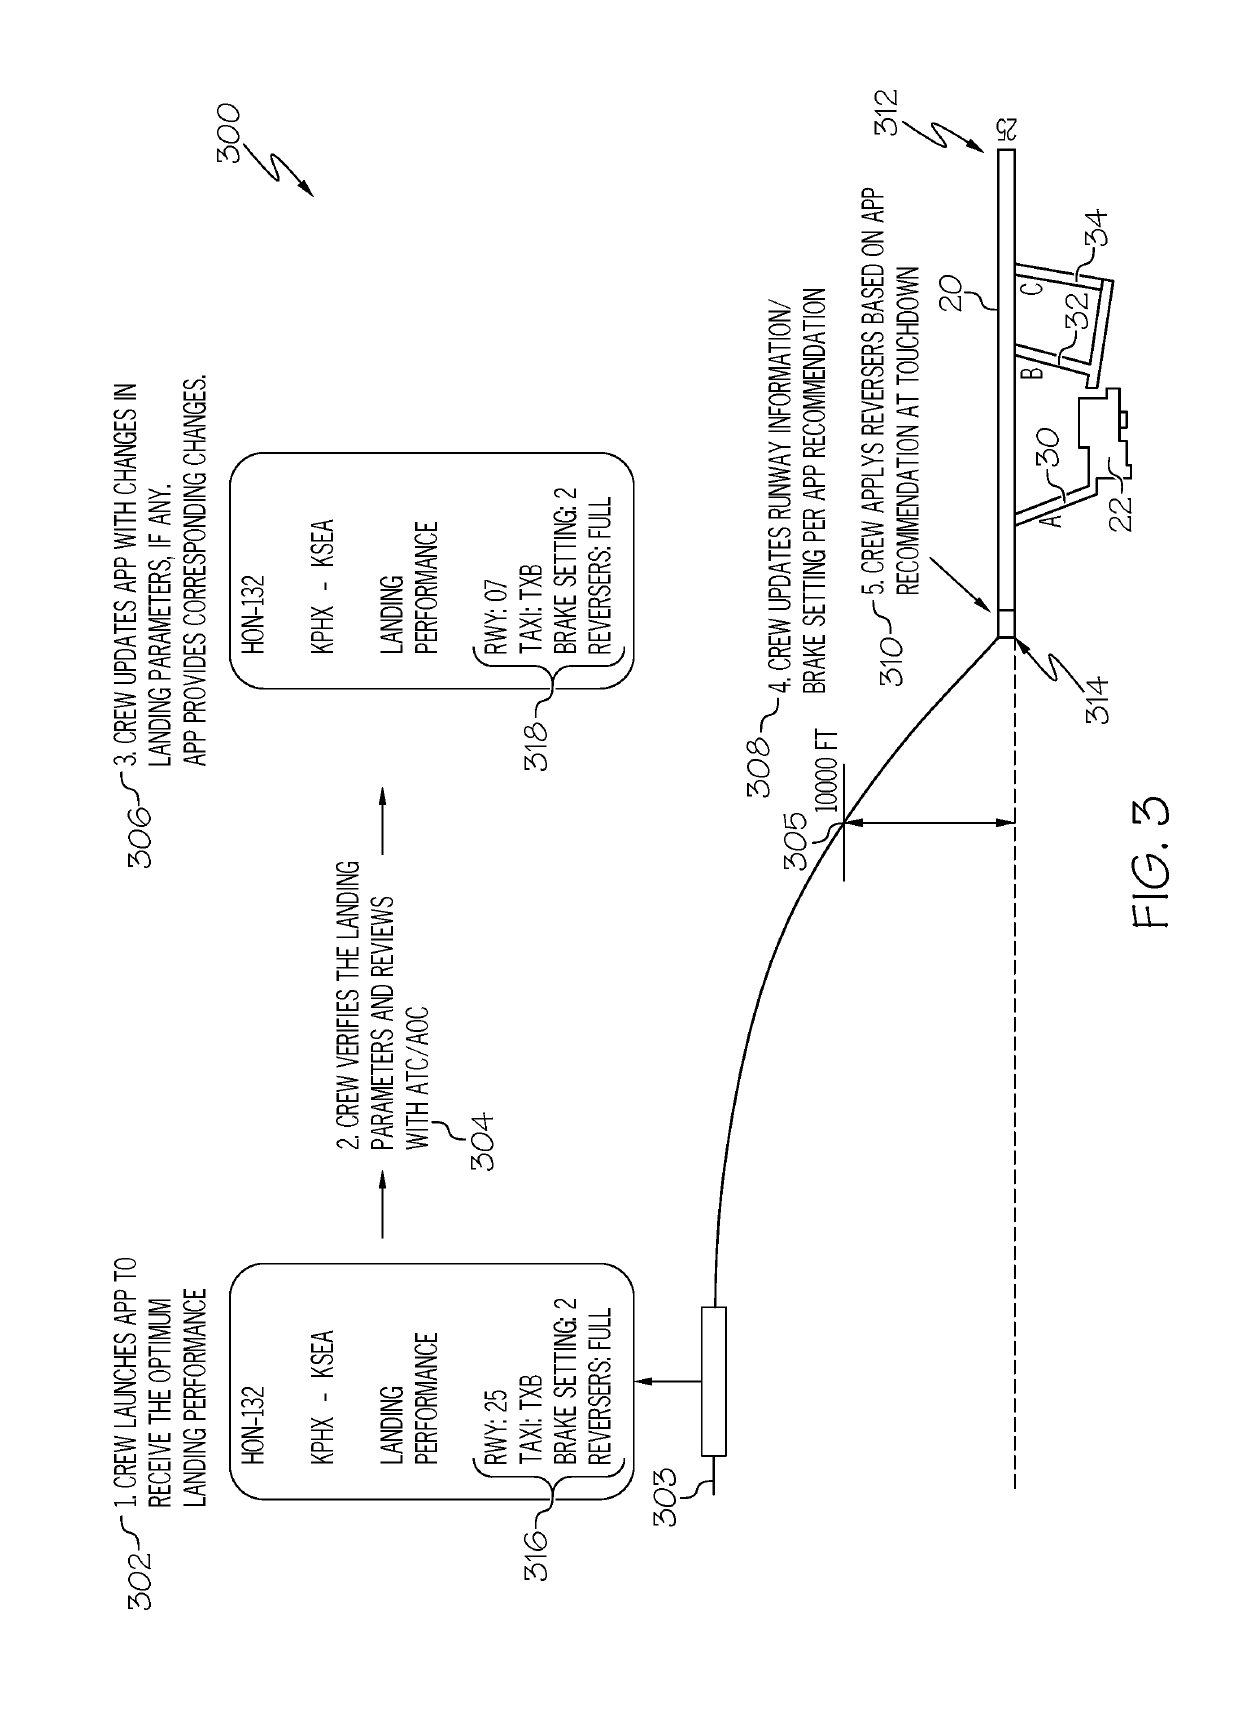 Systems and methods for optimizing landing performance